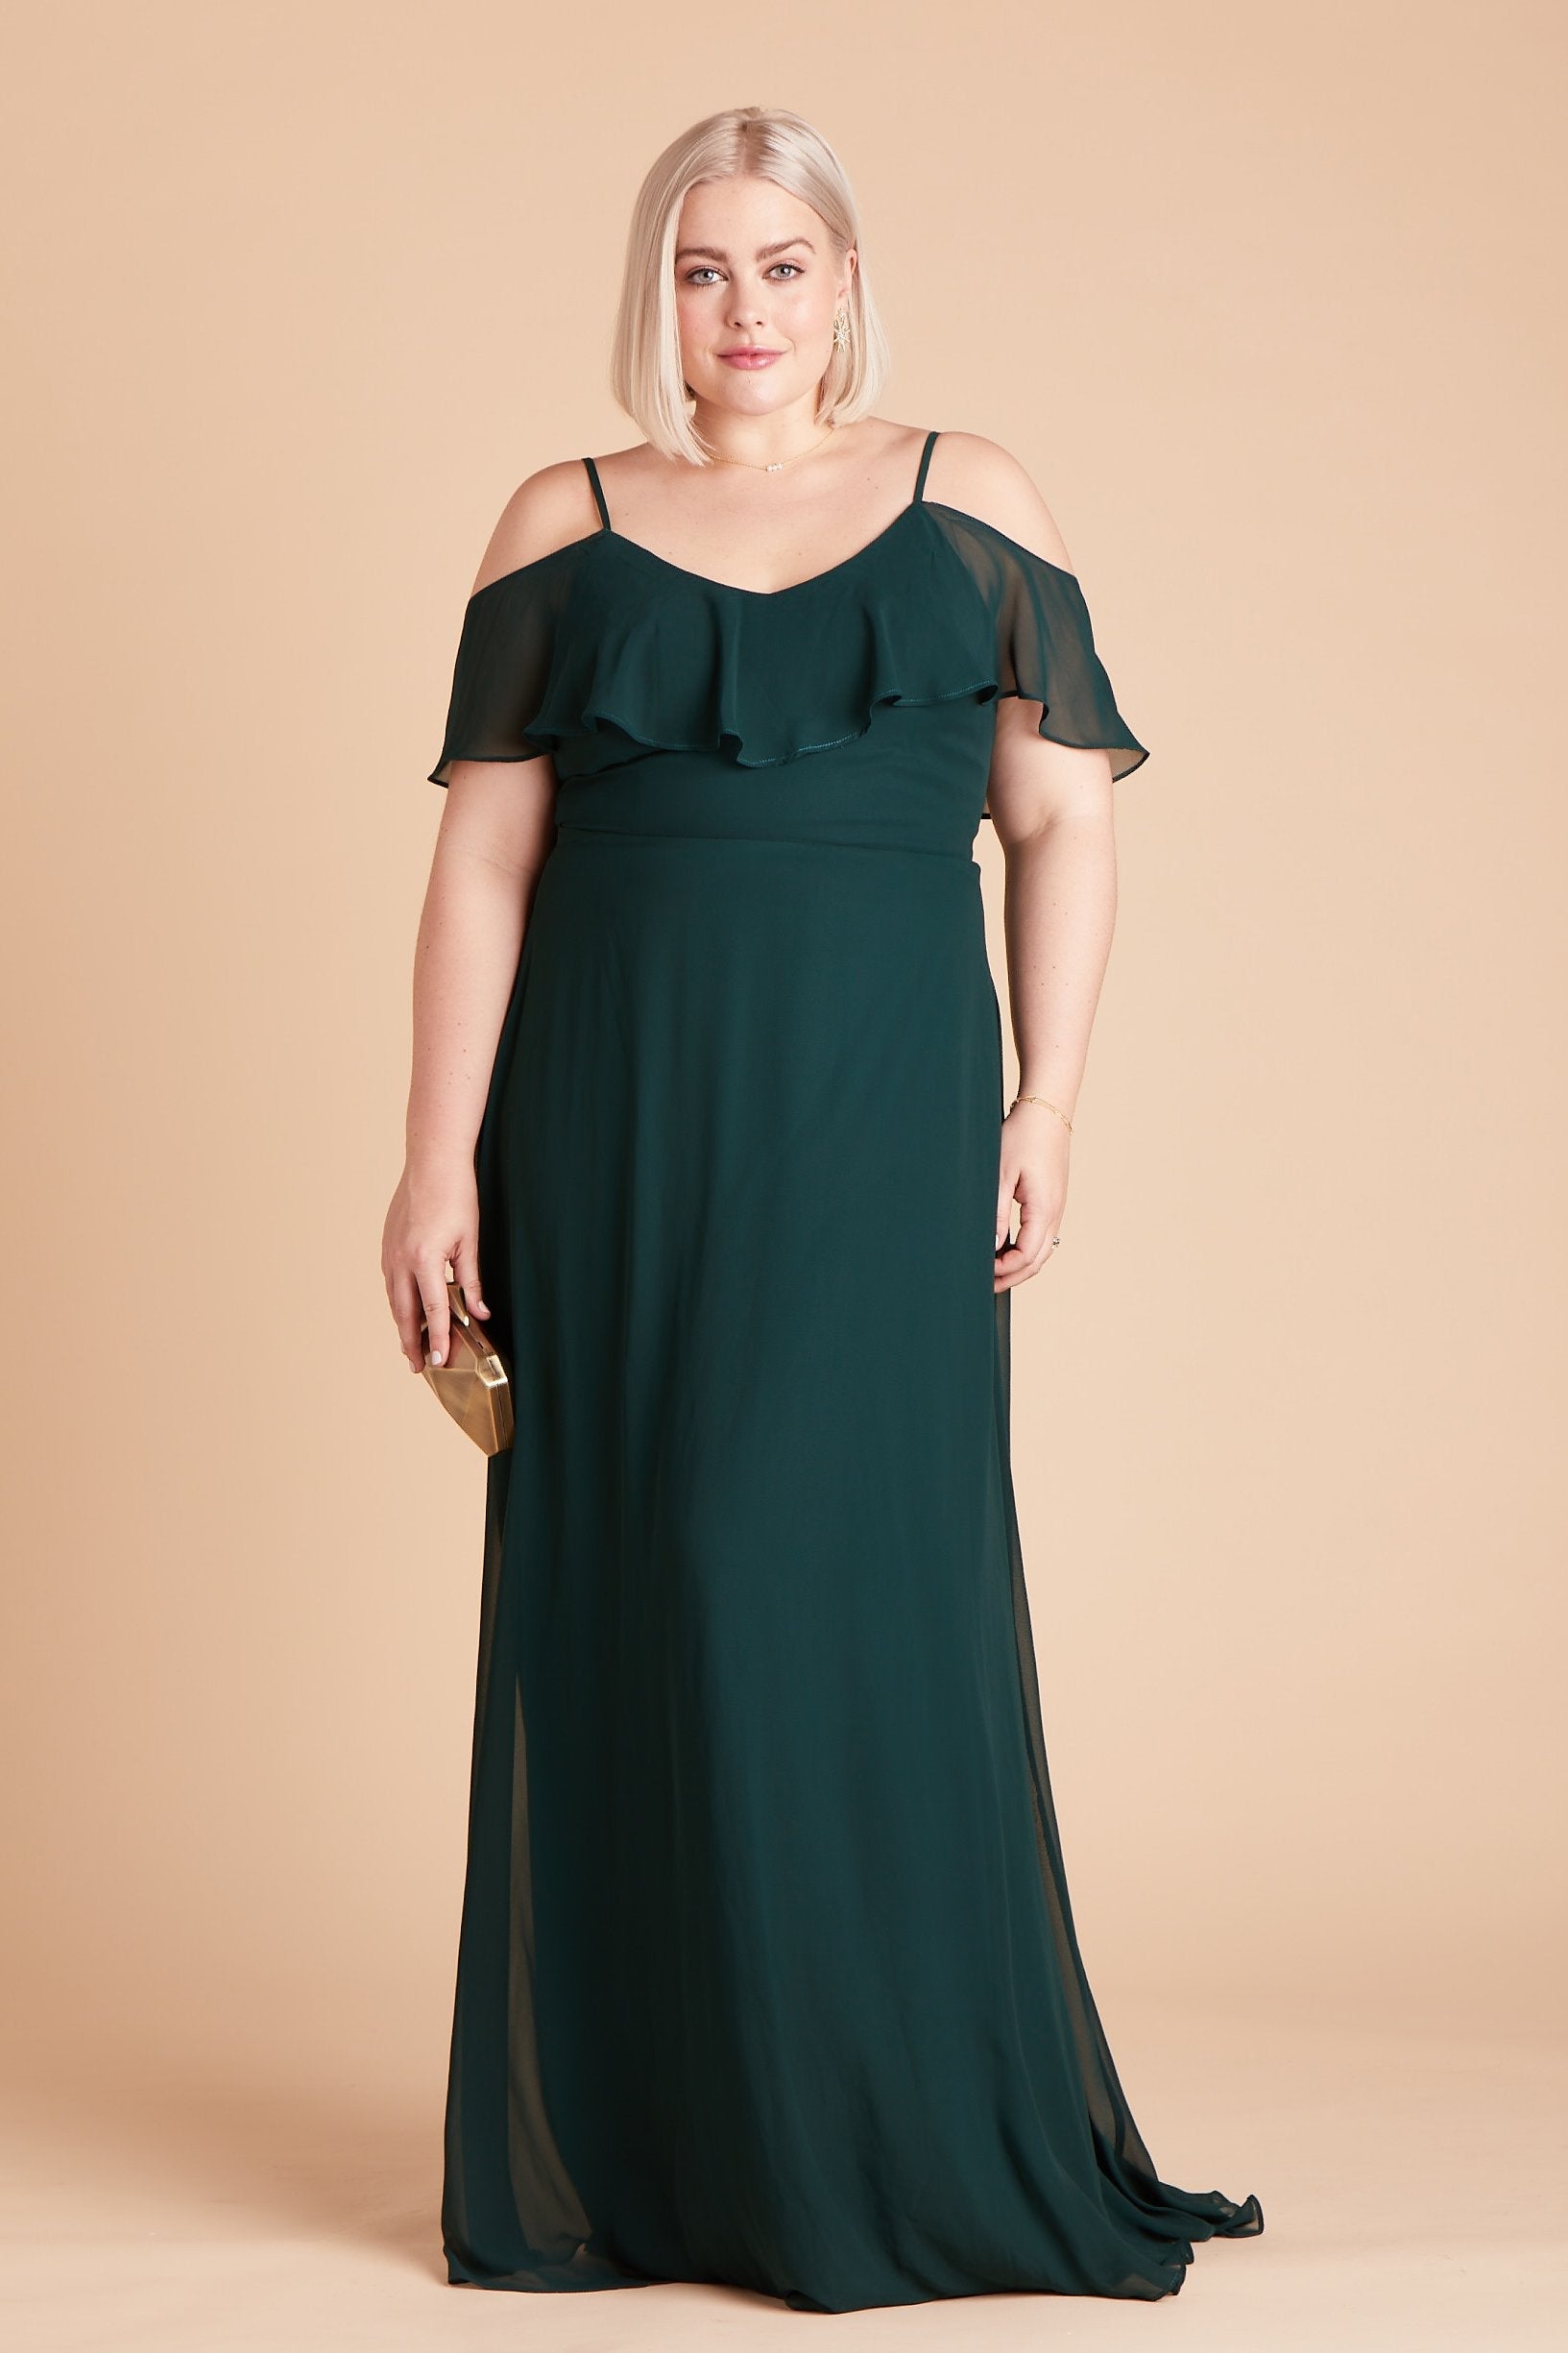 Jane convertible plus size bridesmaid dress in emerald green chiffon by Birdy Grey, front view